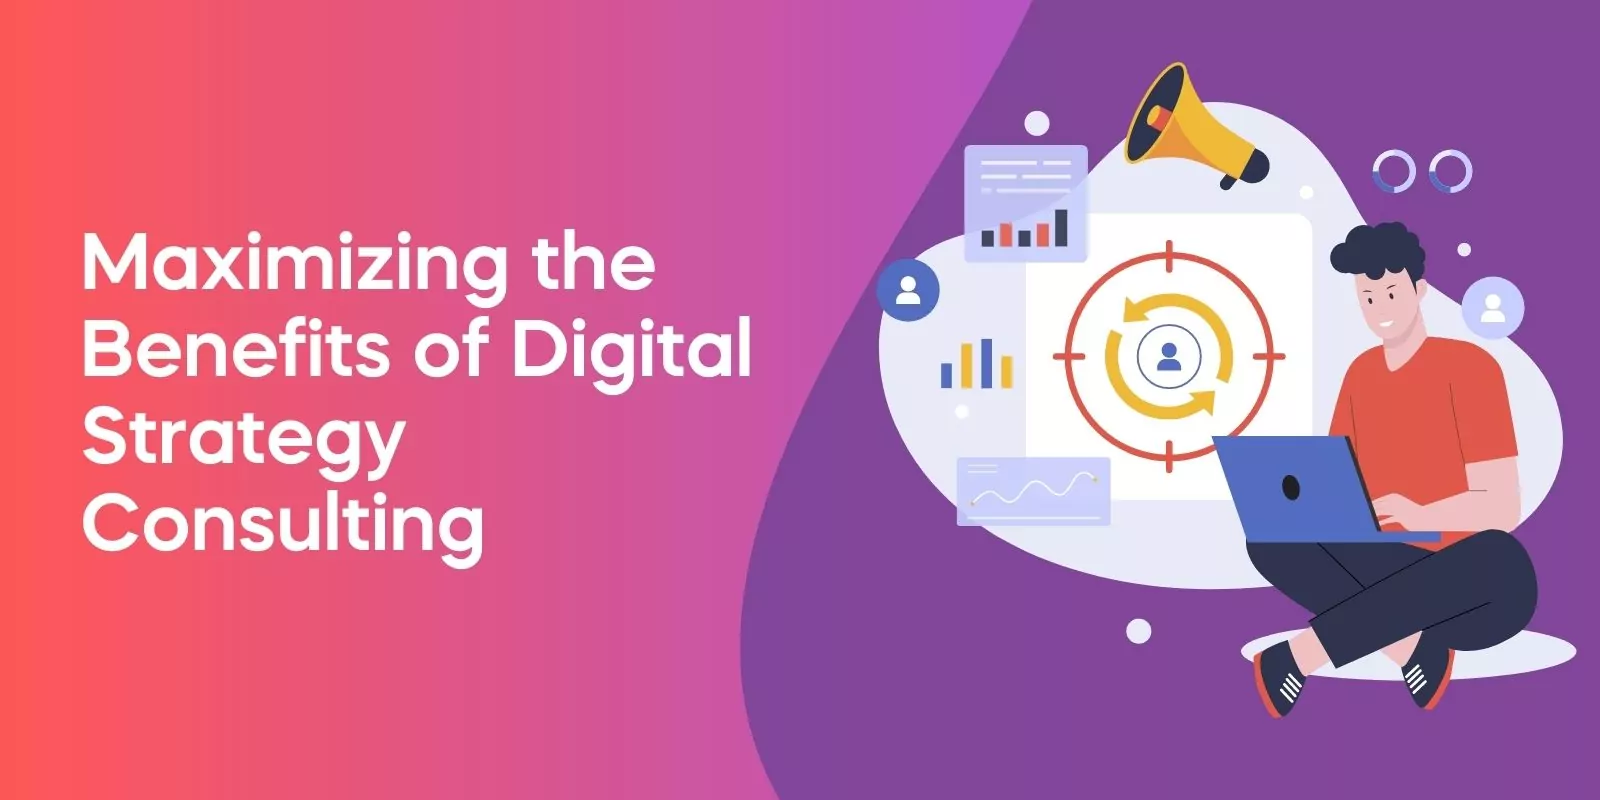 Maximizing the Benefits of Digital Strategy Consulting